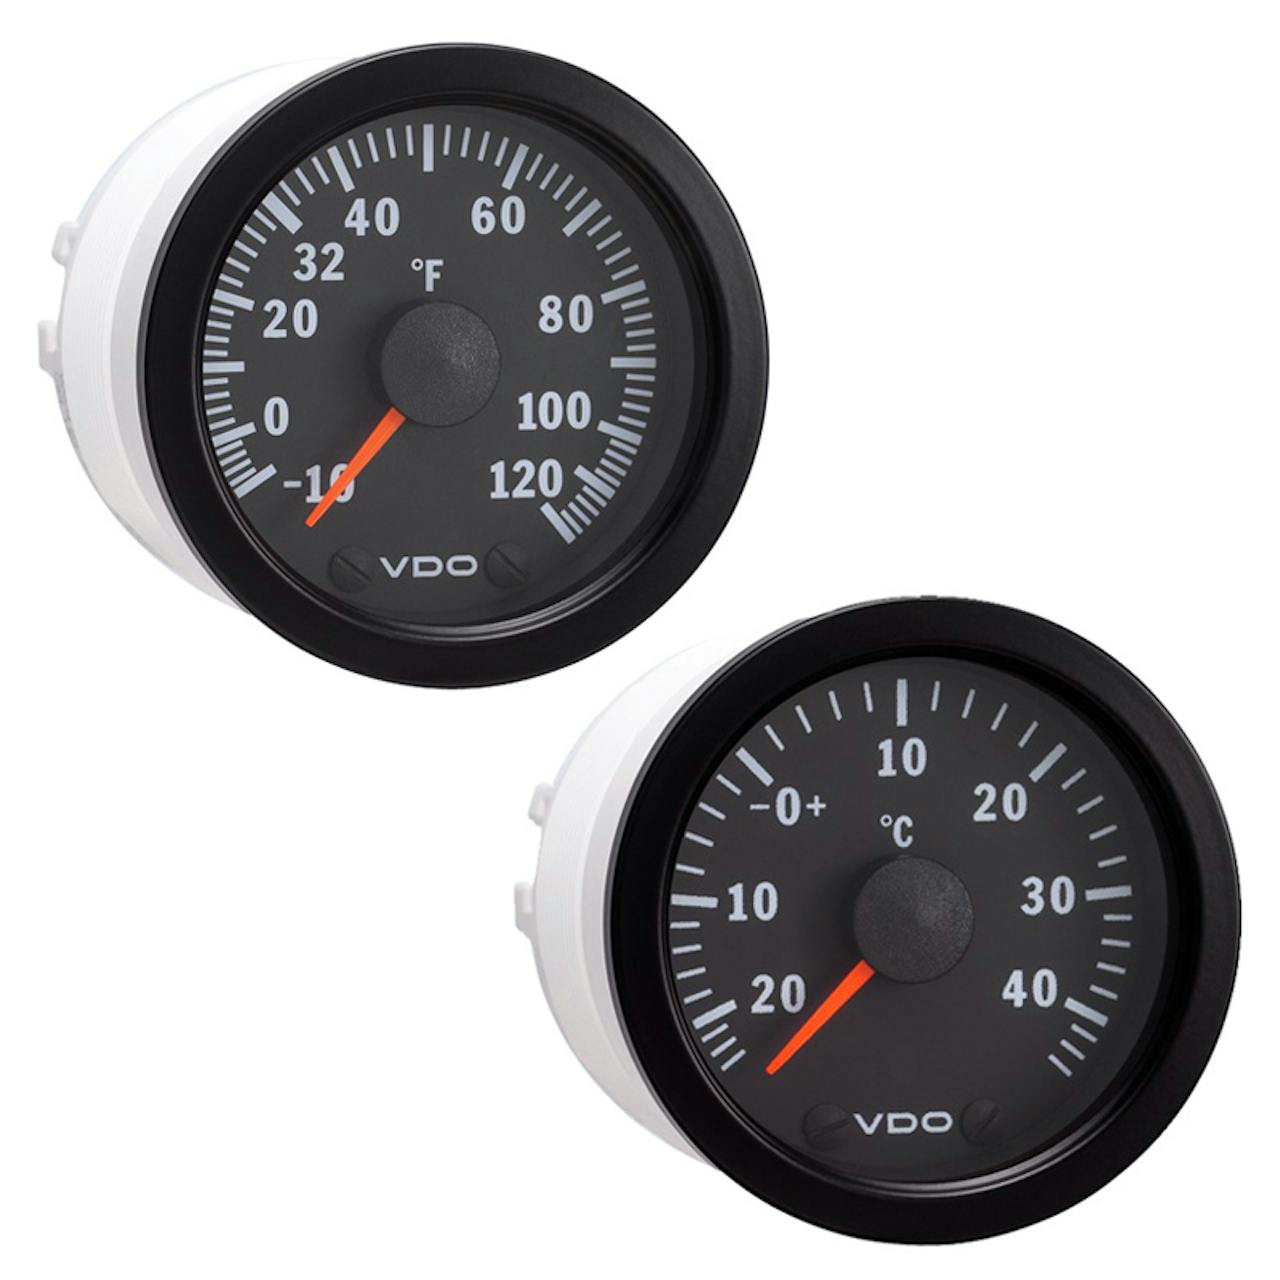 https://raneys-cdn11.imgix.net/images/stencil/original/products/192721/90061/Semi_Truck_Electrical_Outside_Temperature_Gauge_Kit_Vision_Black_397_155__29982.1430230976.jpg?auto=compress,format&w=1280